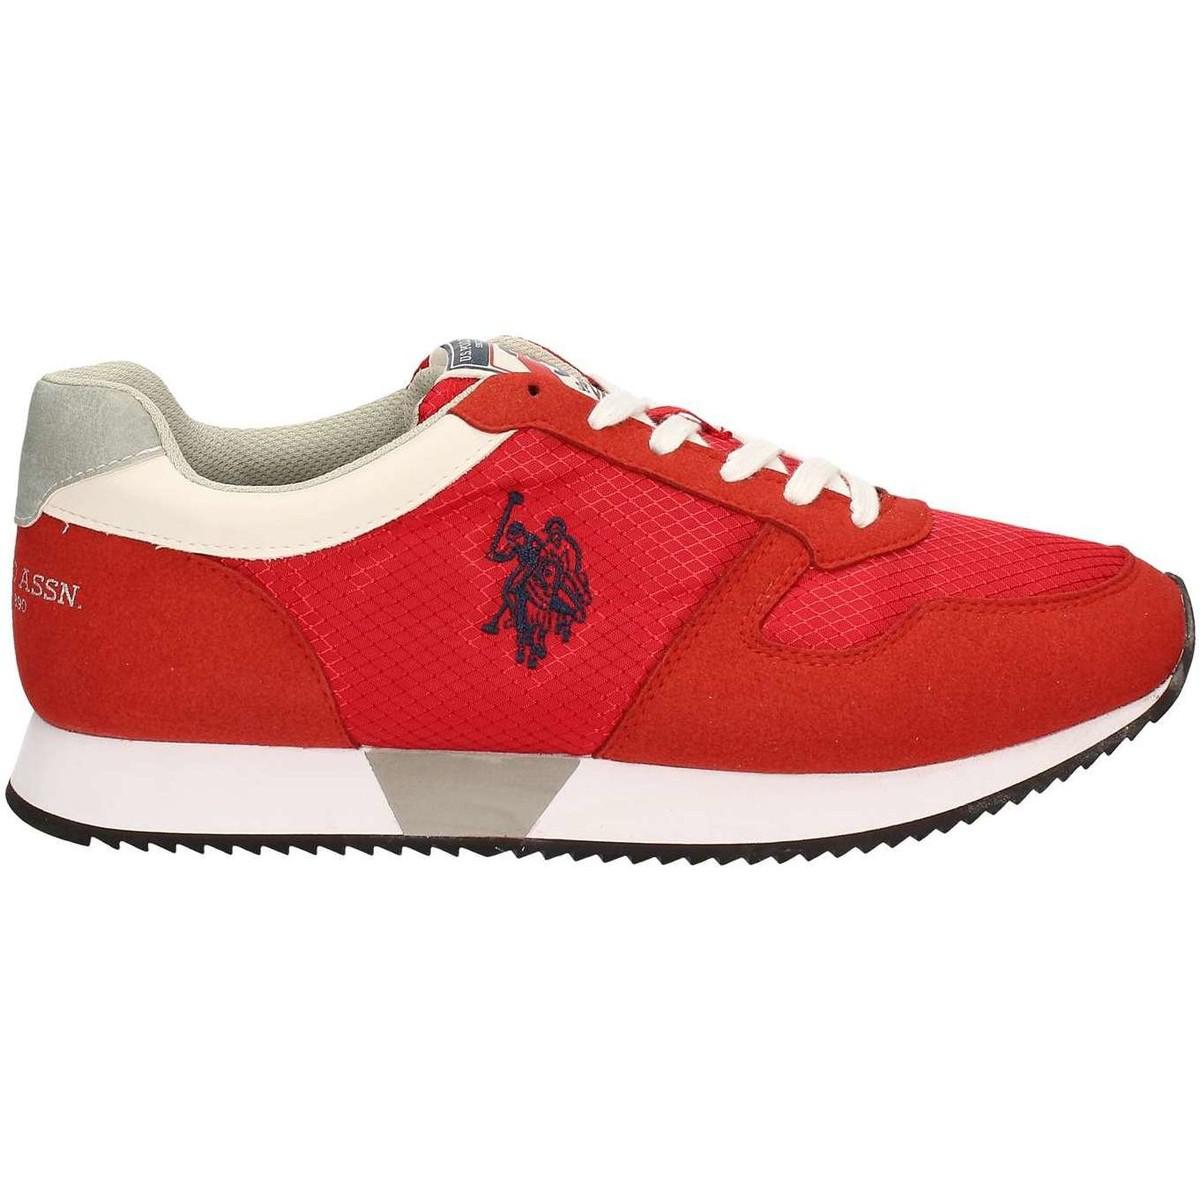 us polo red sneakers \u003e Up to 64% OFF 